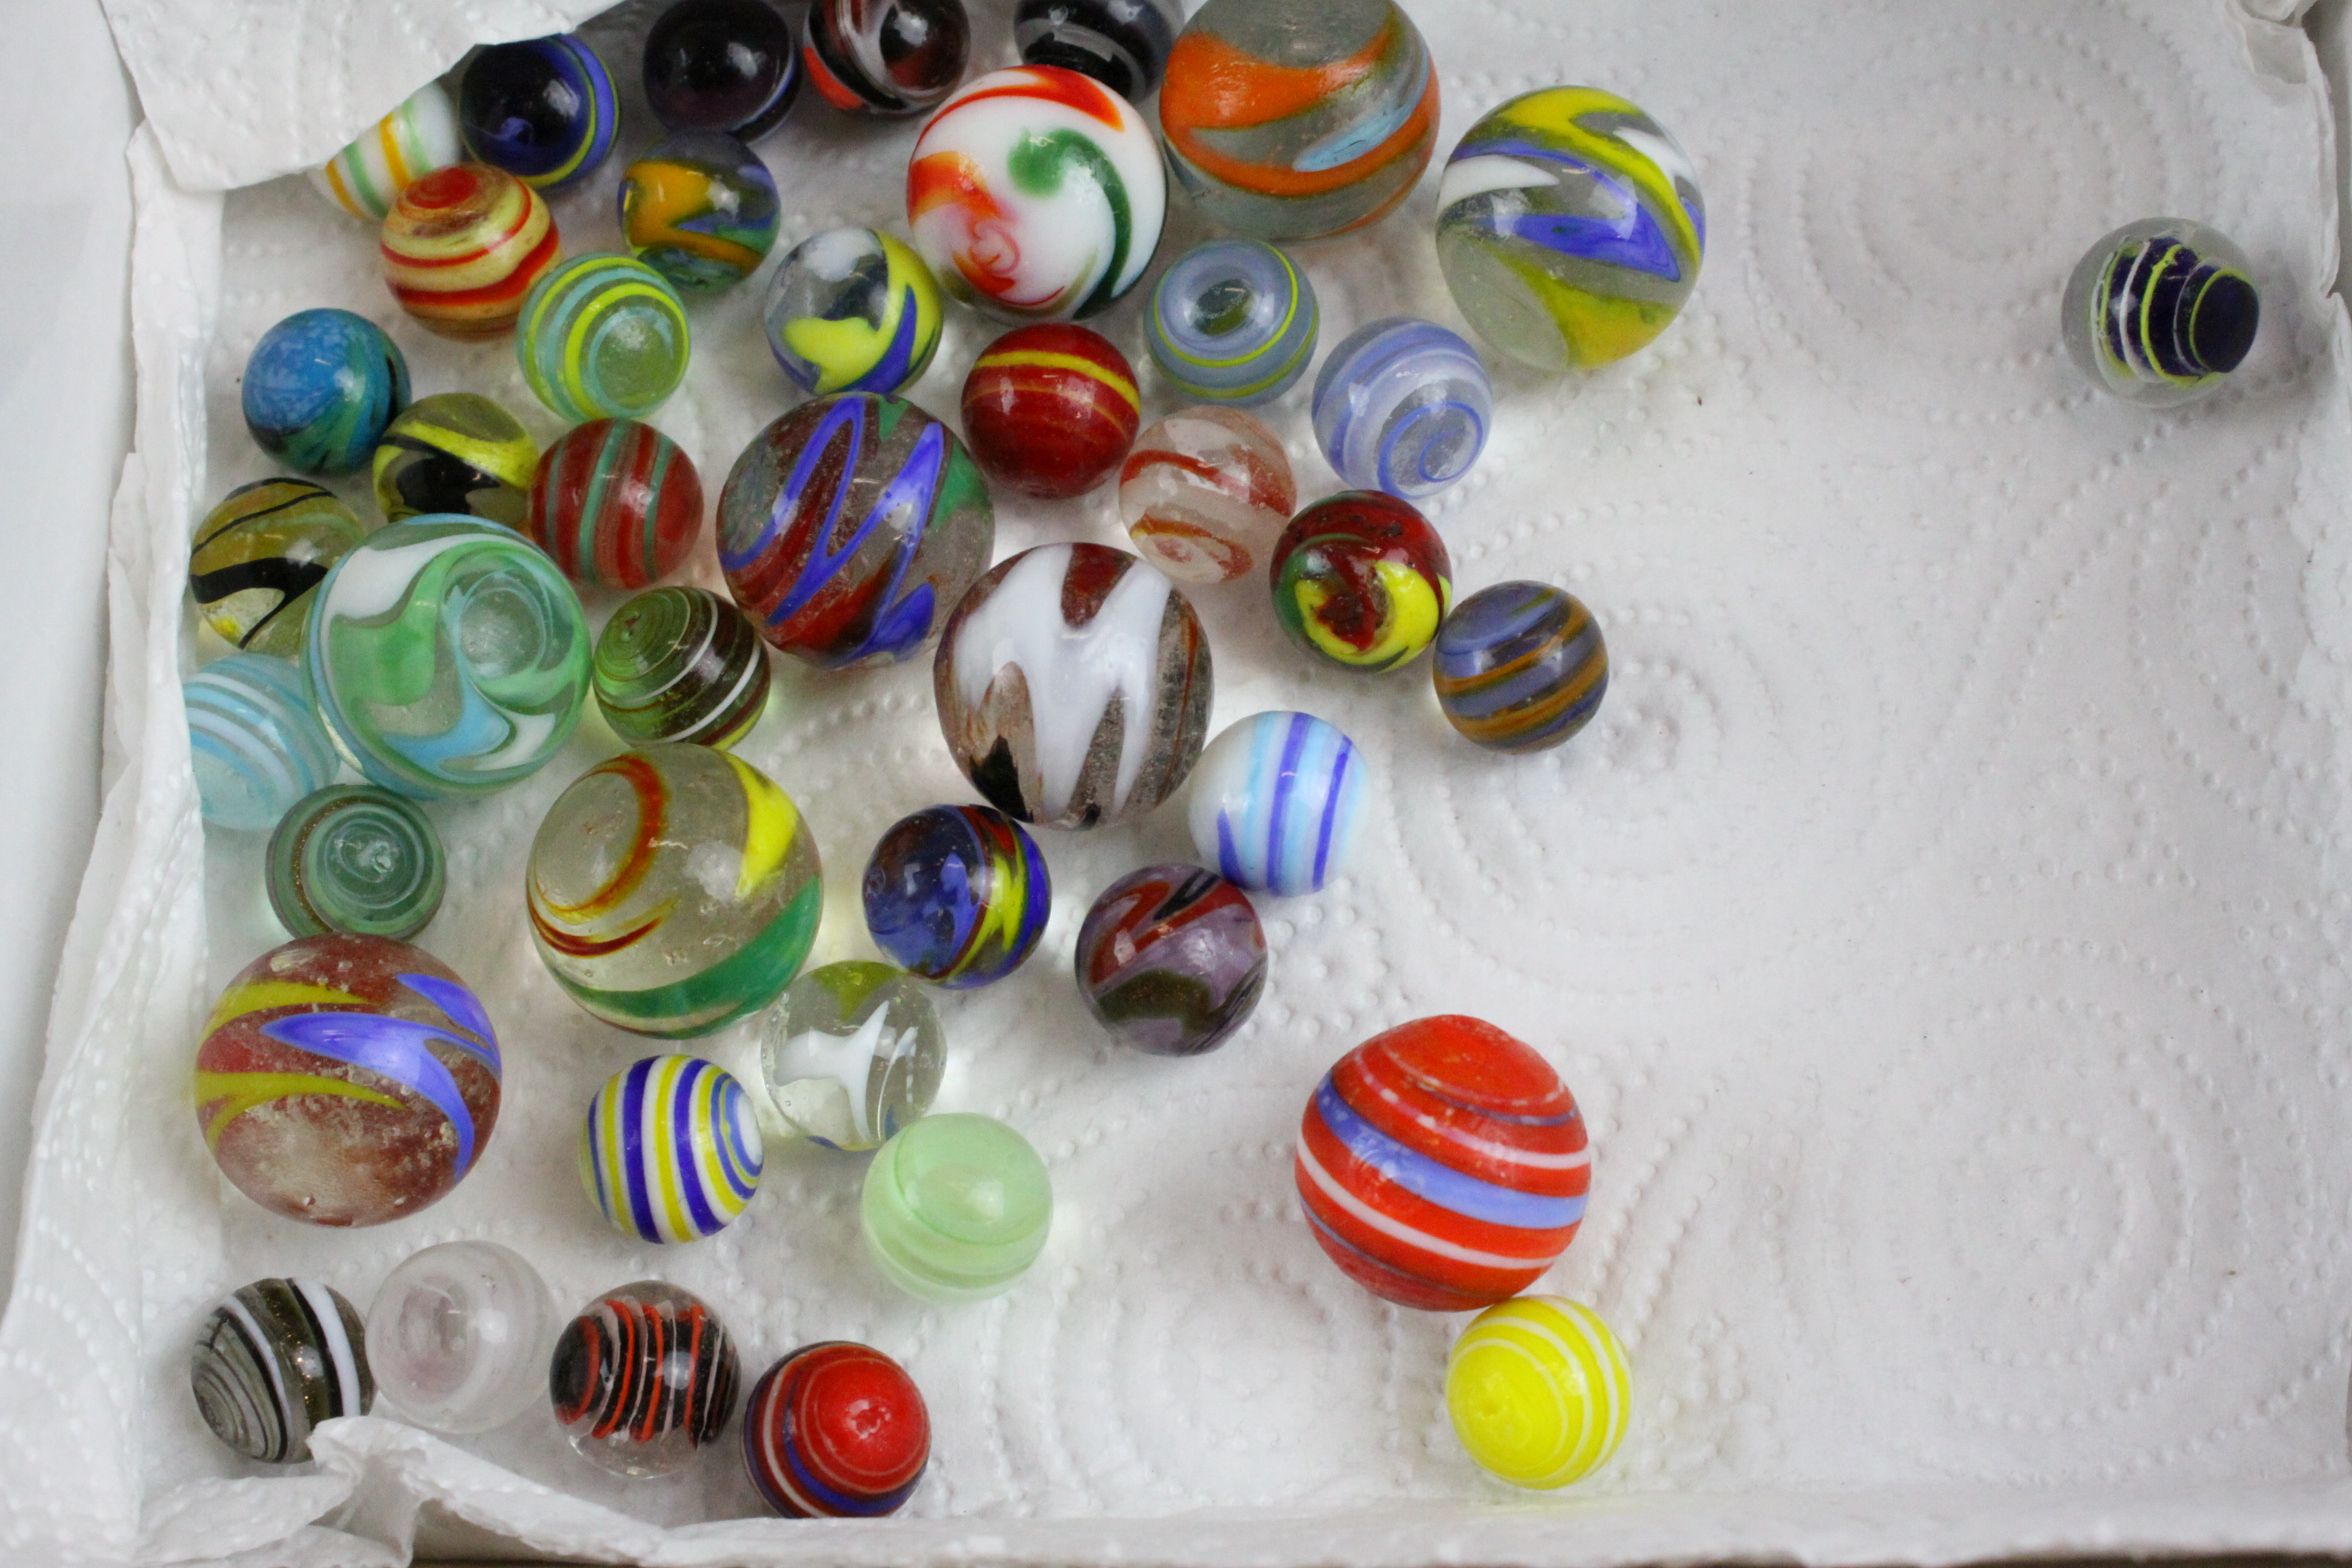 A small collection of vintage marbles.